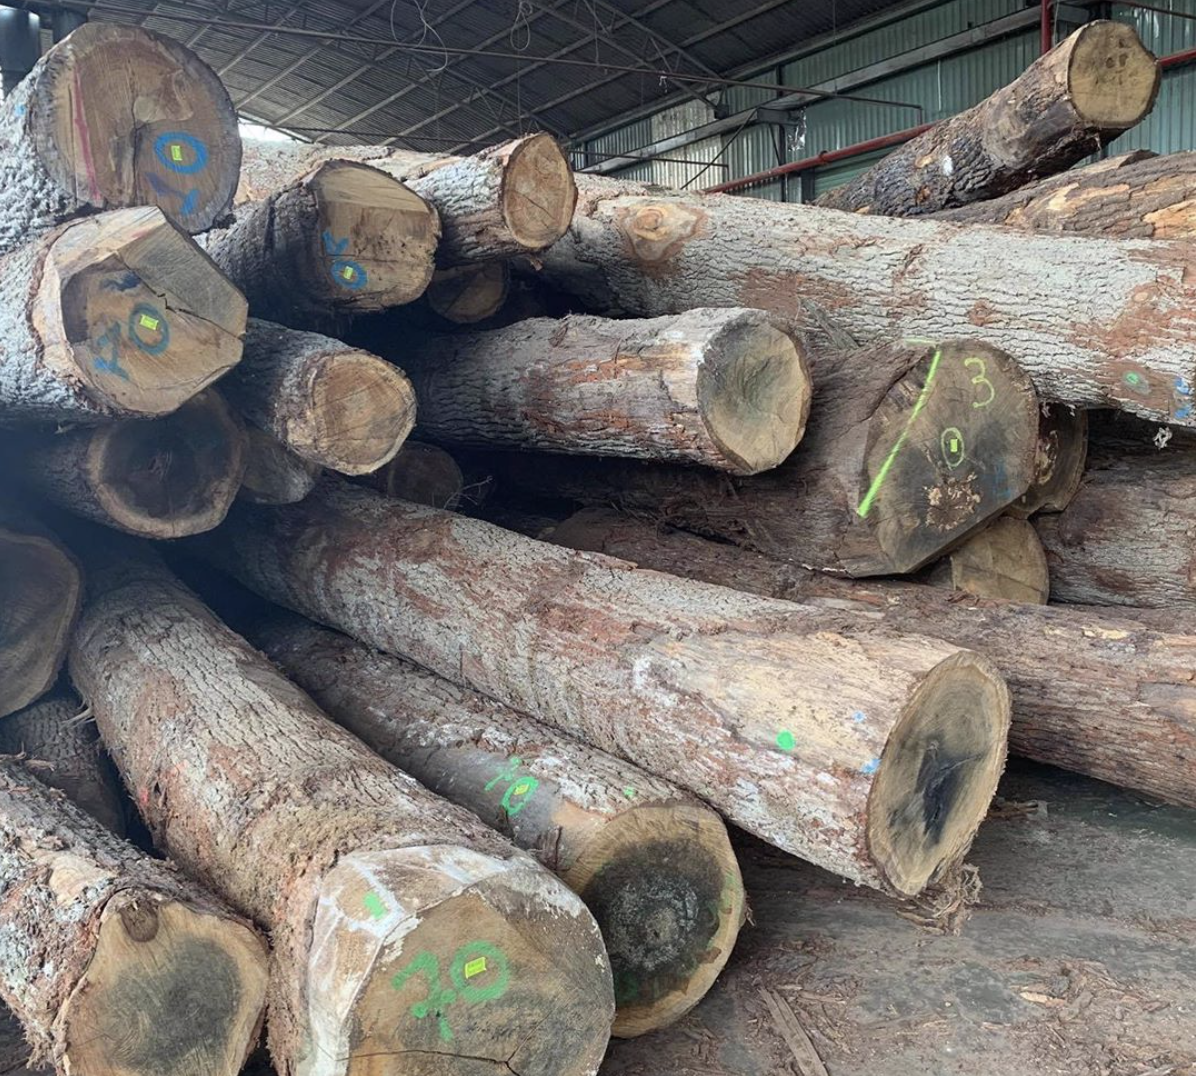 European French oak logs stacked in our factory. These will soon become engineered wide plank flooring